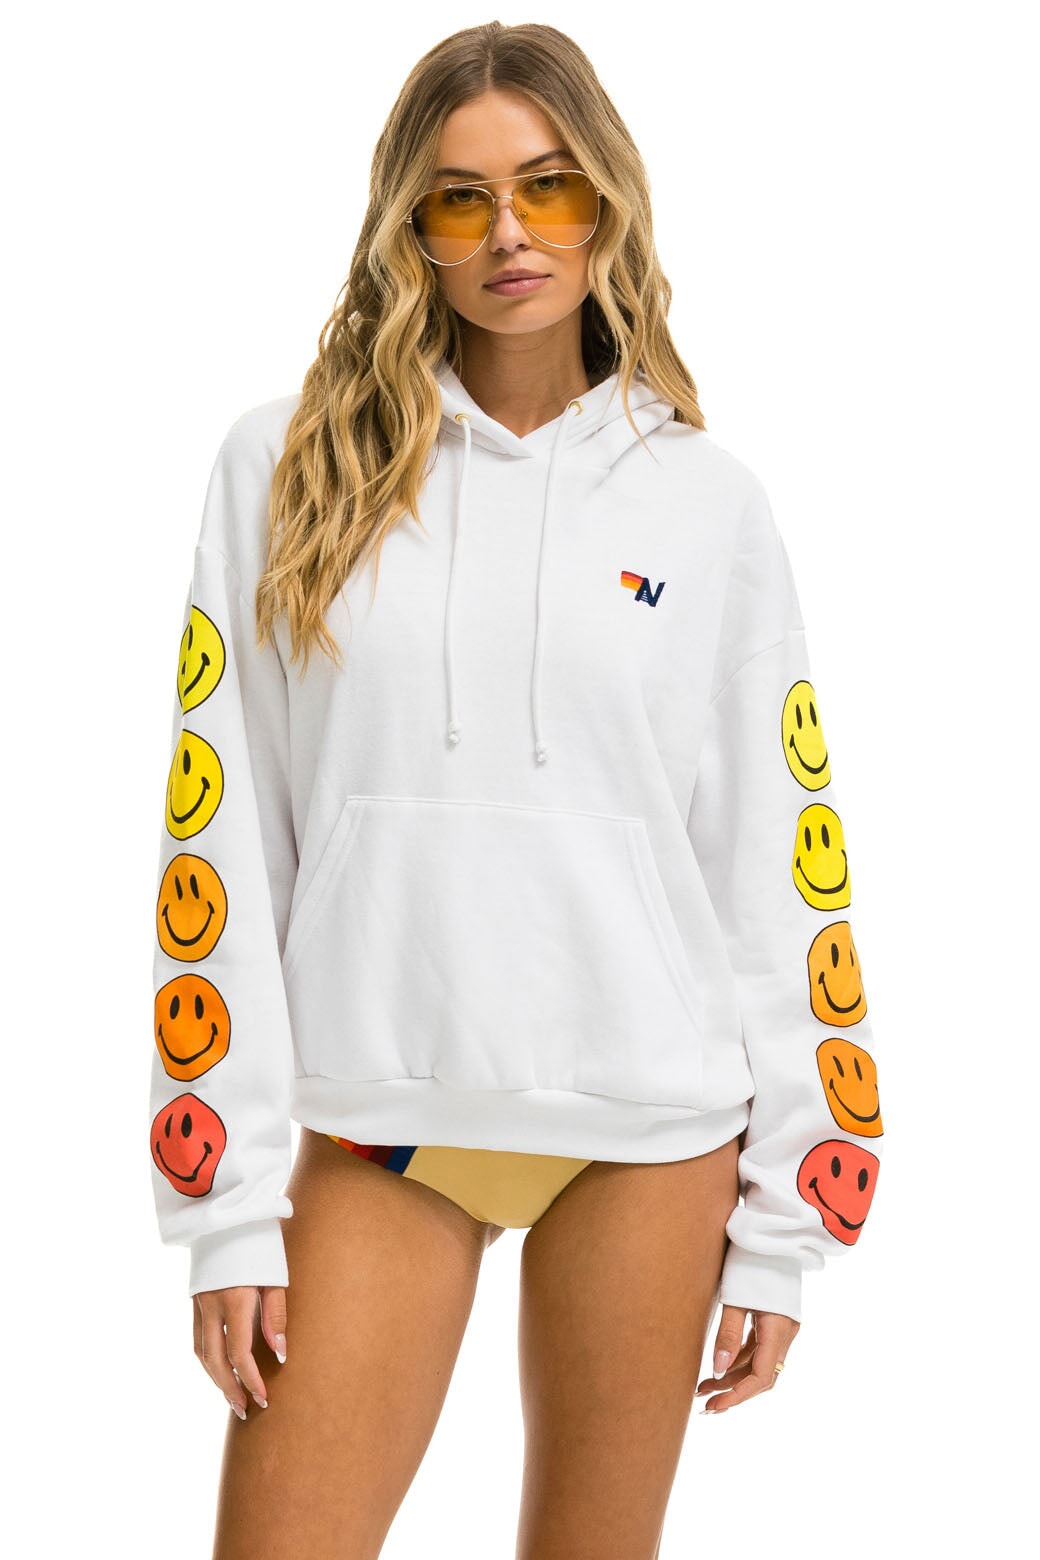 SMILEY SUNSET RELAXED PULLOVER HOODIE - WHITE - Aviator Nation